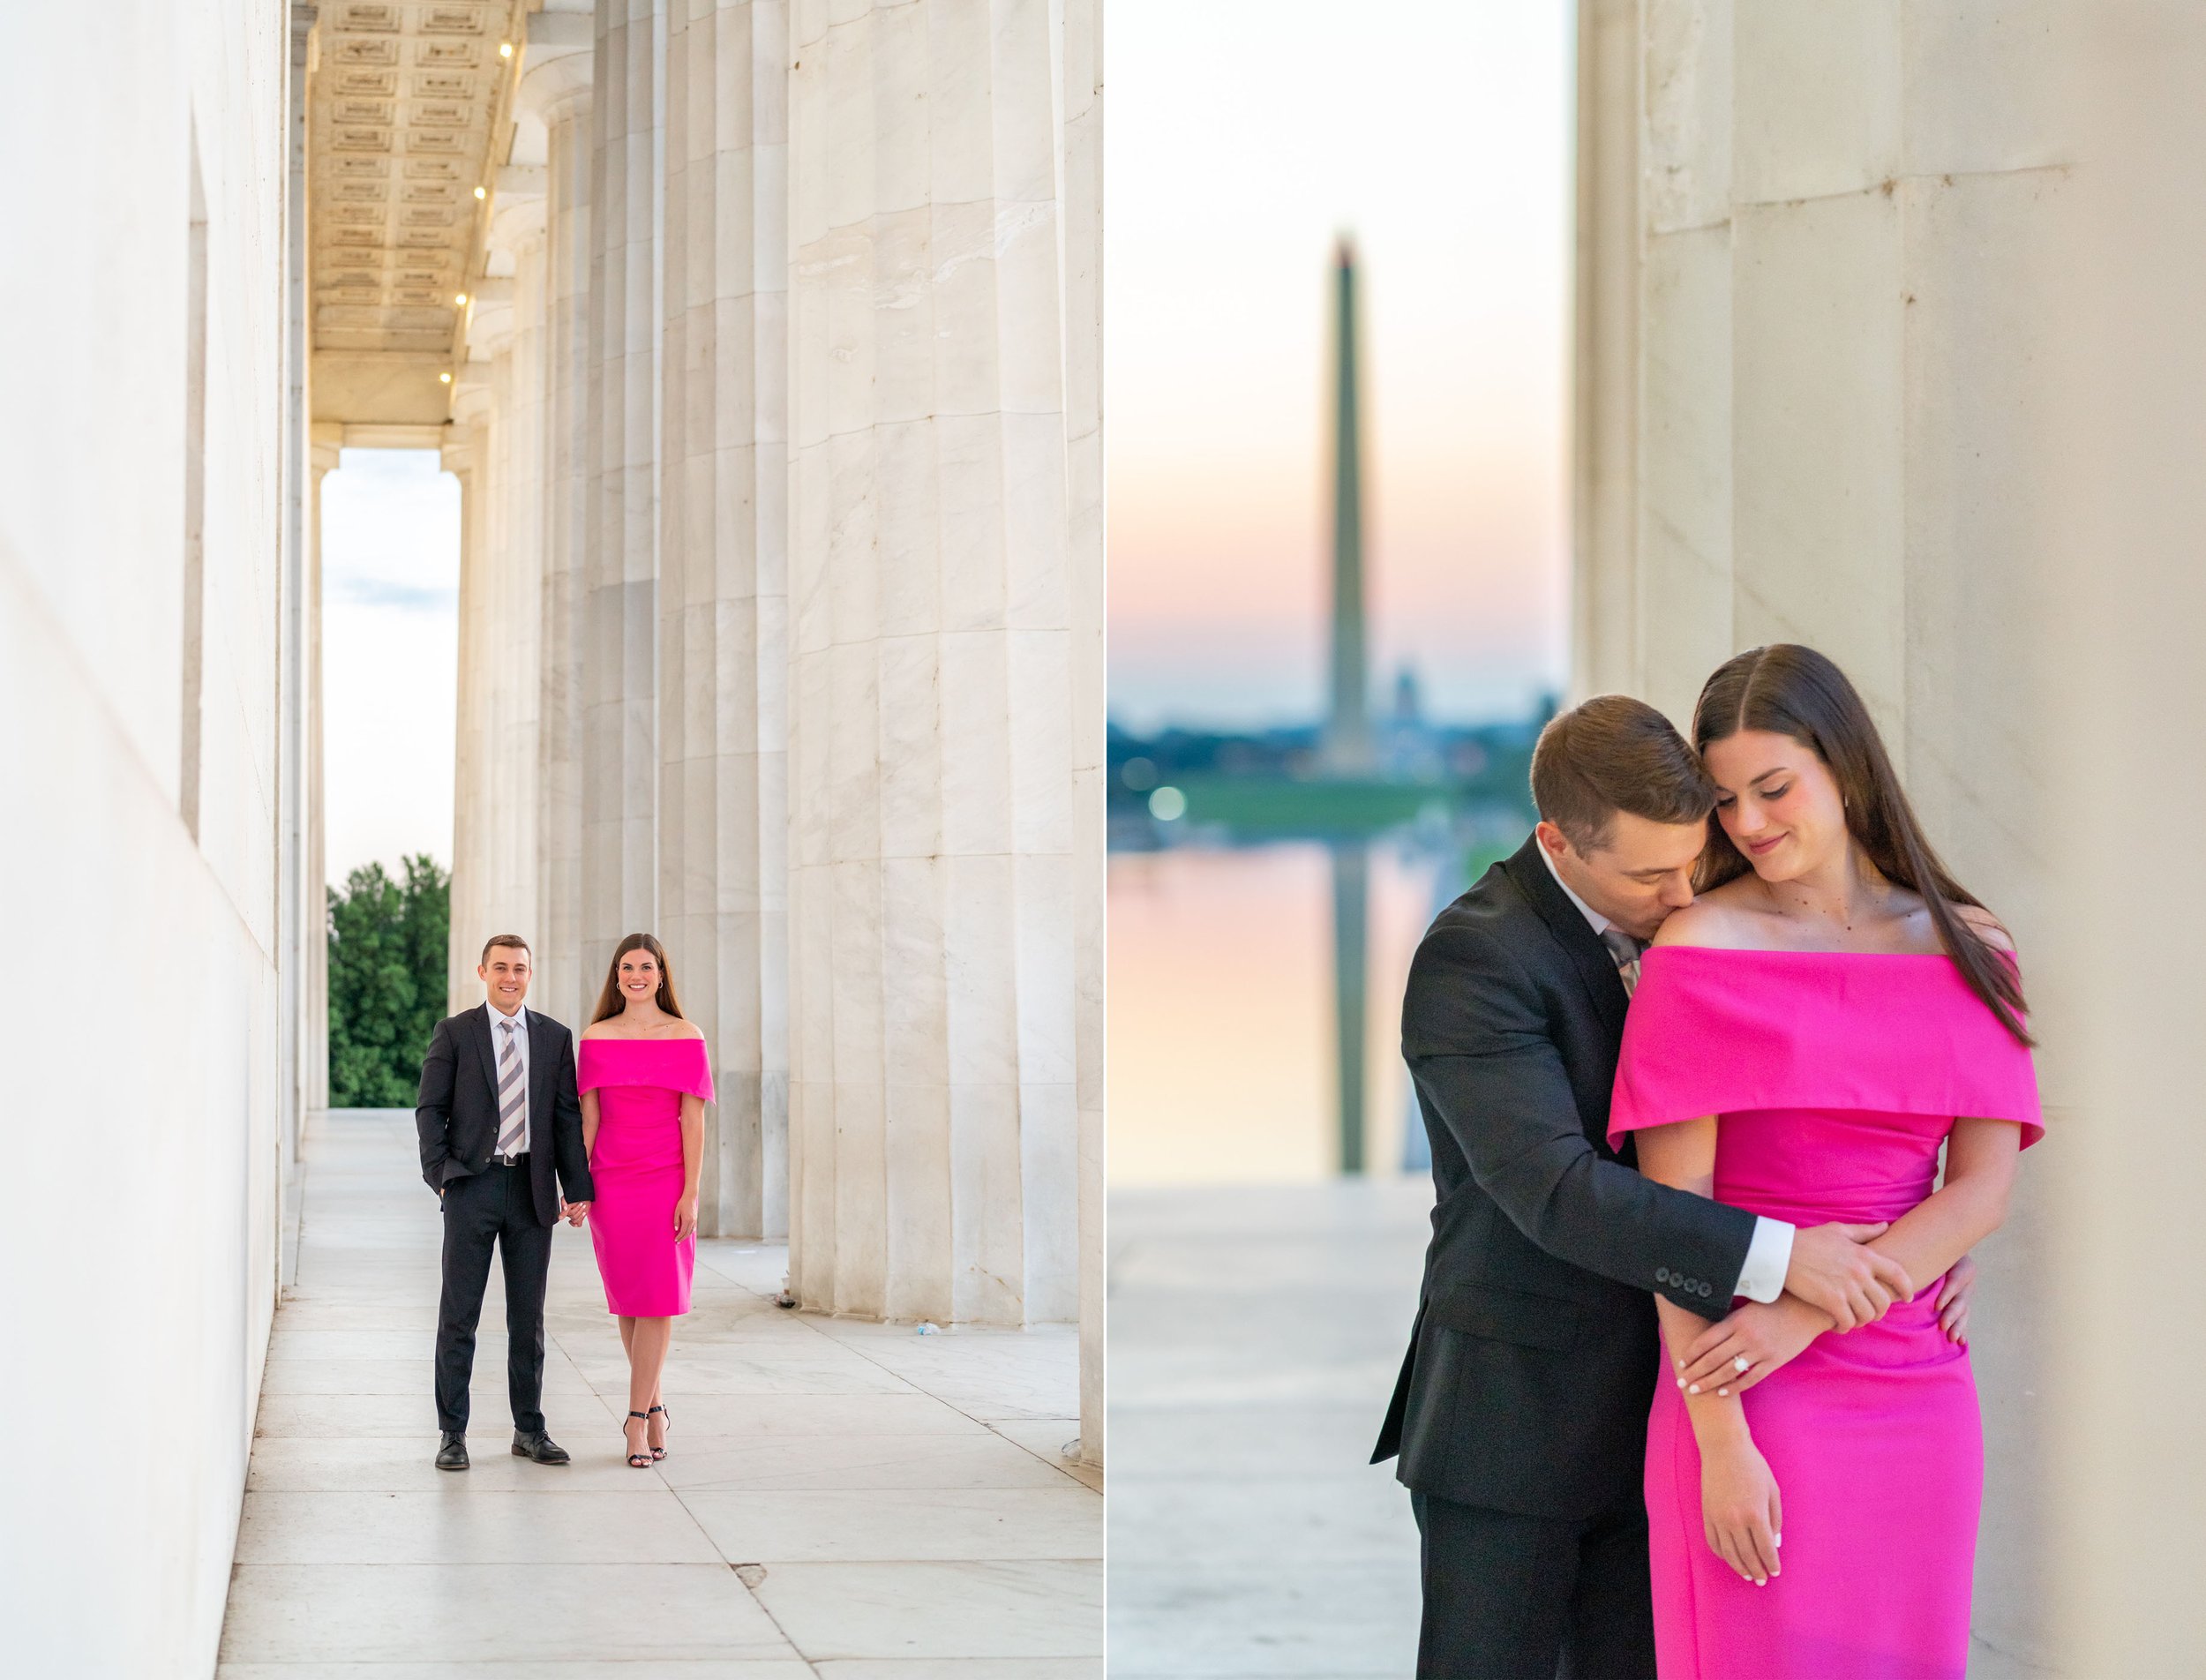 sunrise and sunset portraits at the Lincoln memorial looking at the national monument in DC